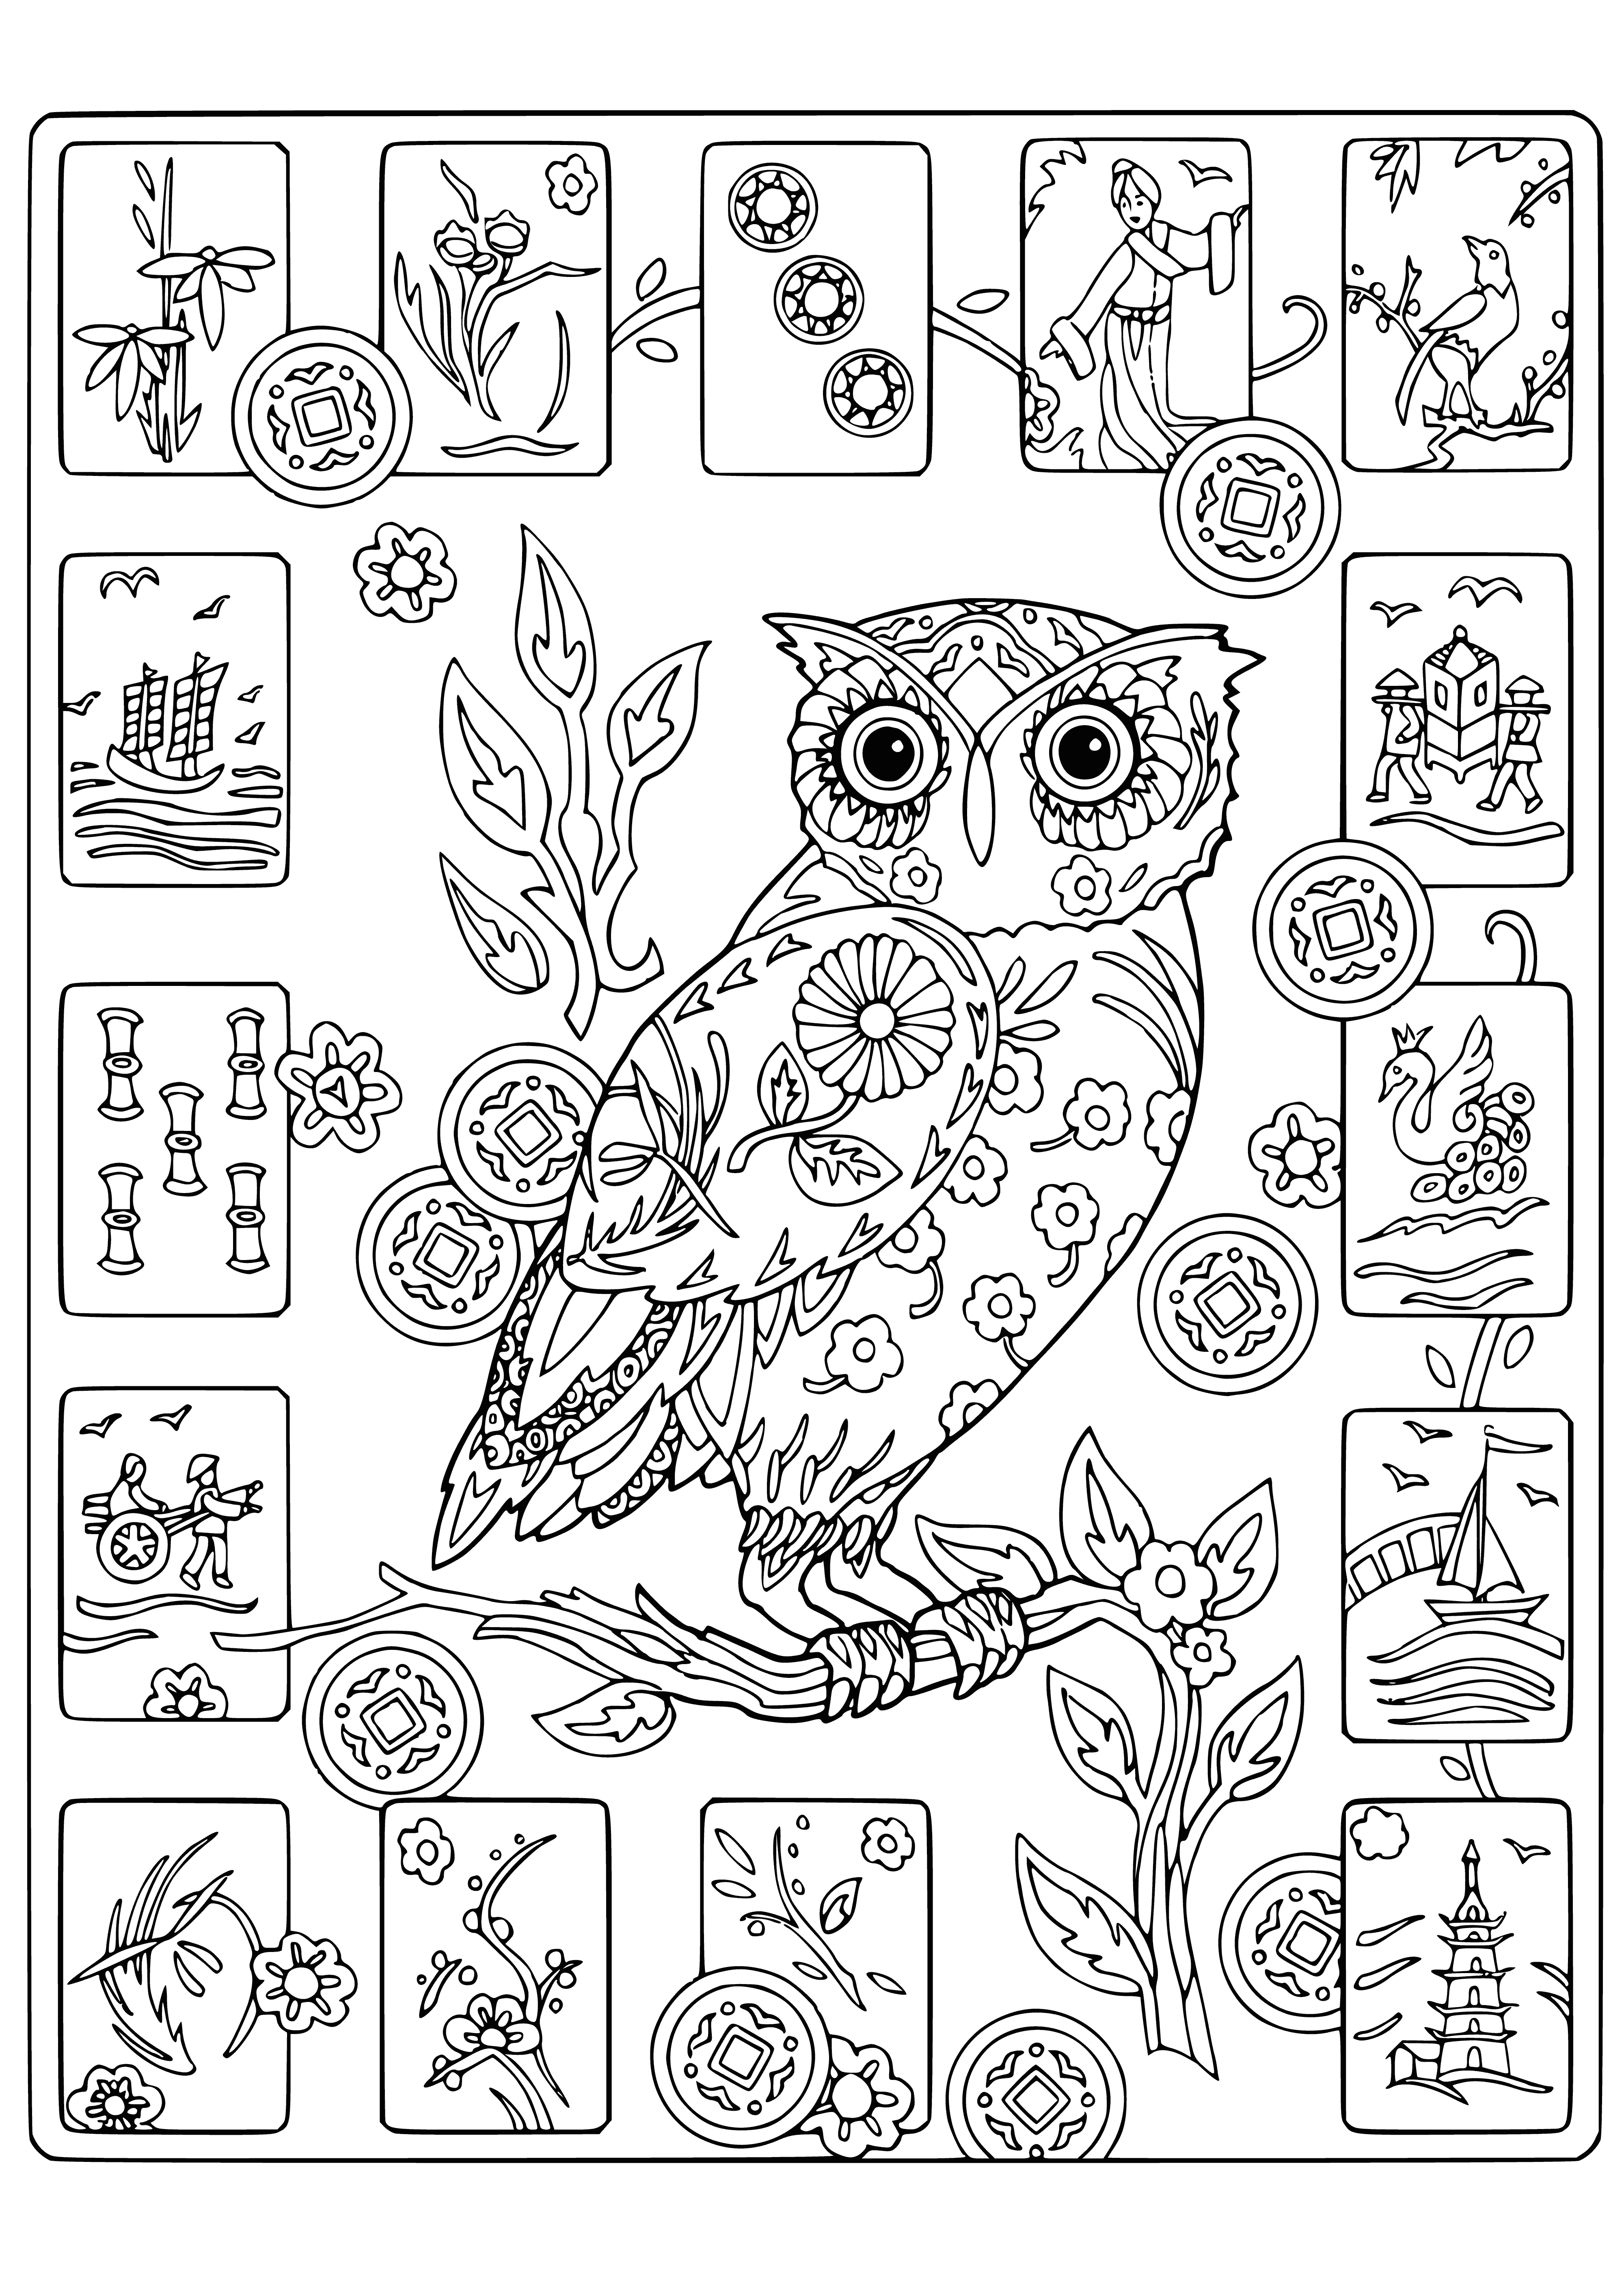 coloring page: Two peaceful owls, one with flower pattern and one with geometric pattern, surround this coloring page. #owls #coloring #patterns